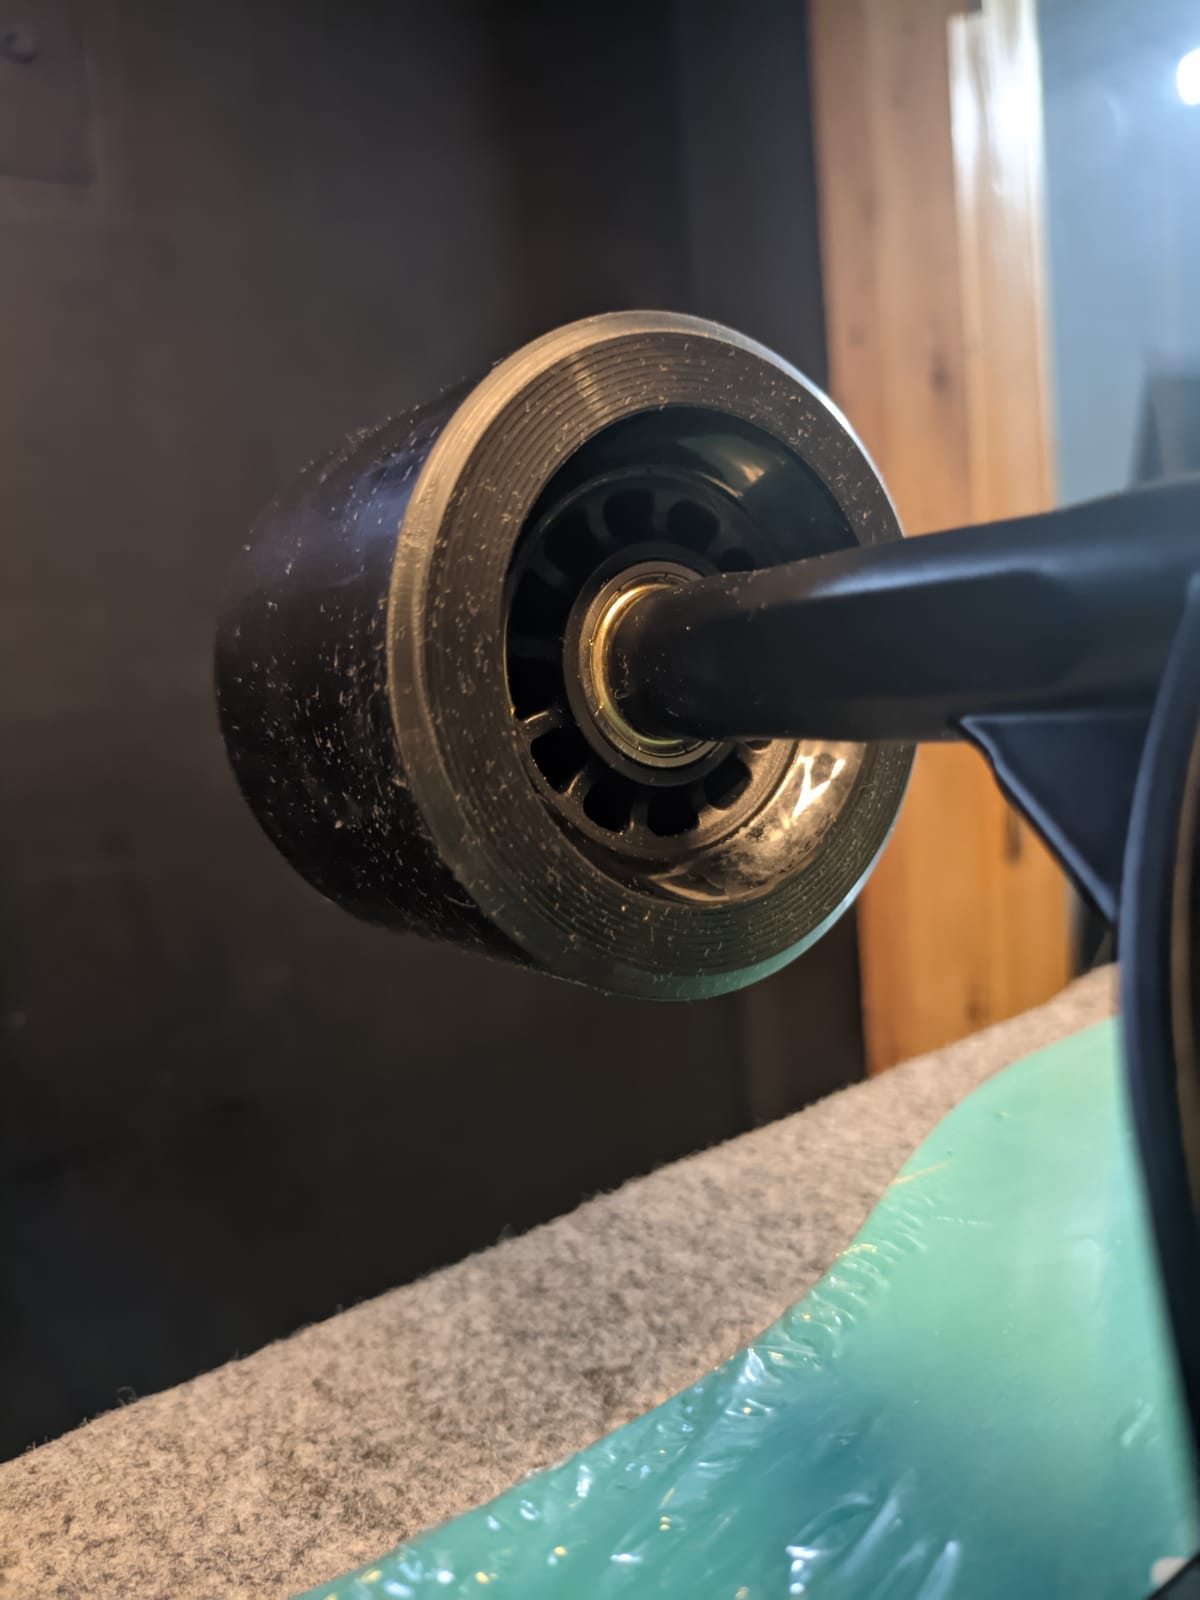 Are Longboards With Larger Wheels Better For Pumping?